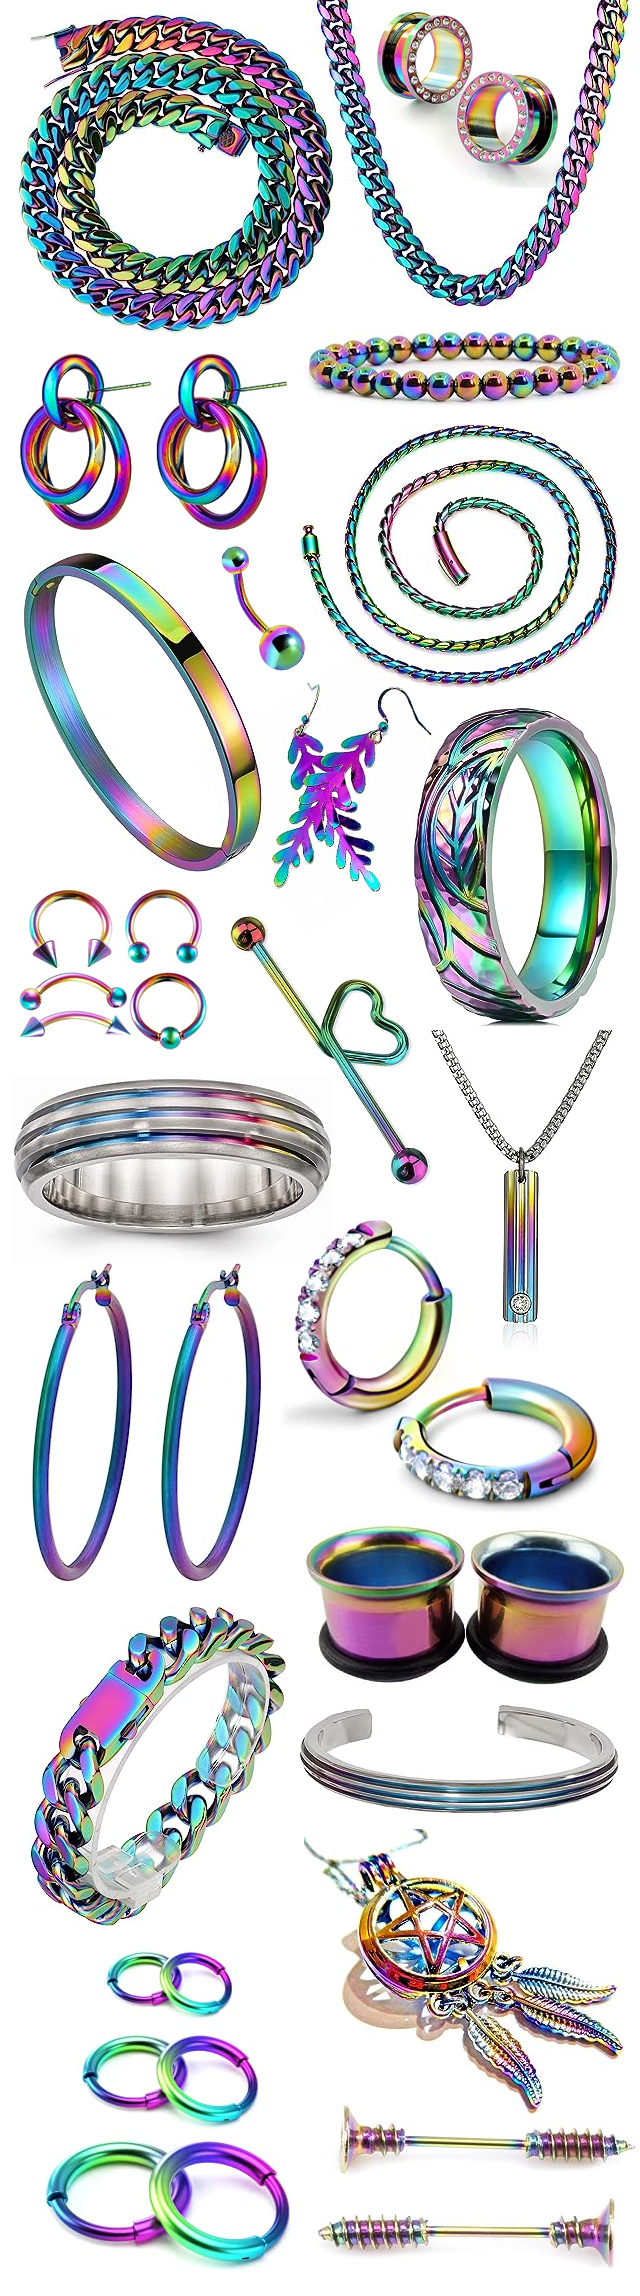 Anodized Plated Jewelry